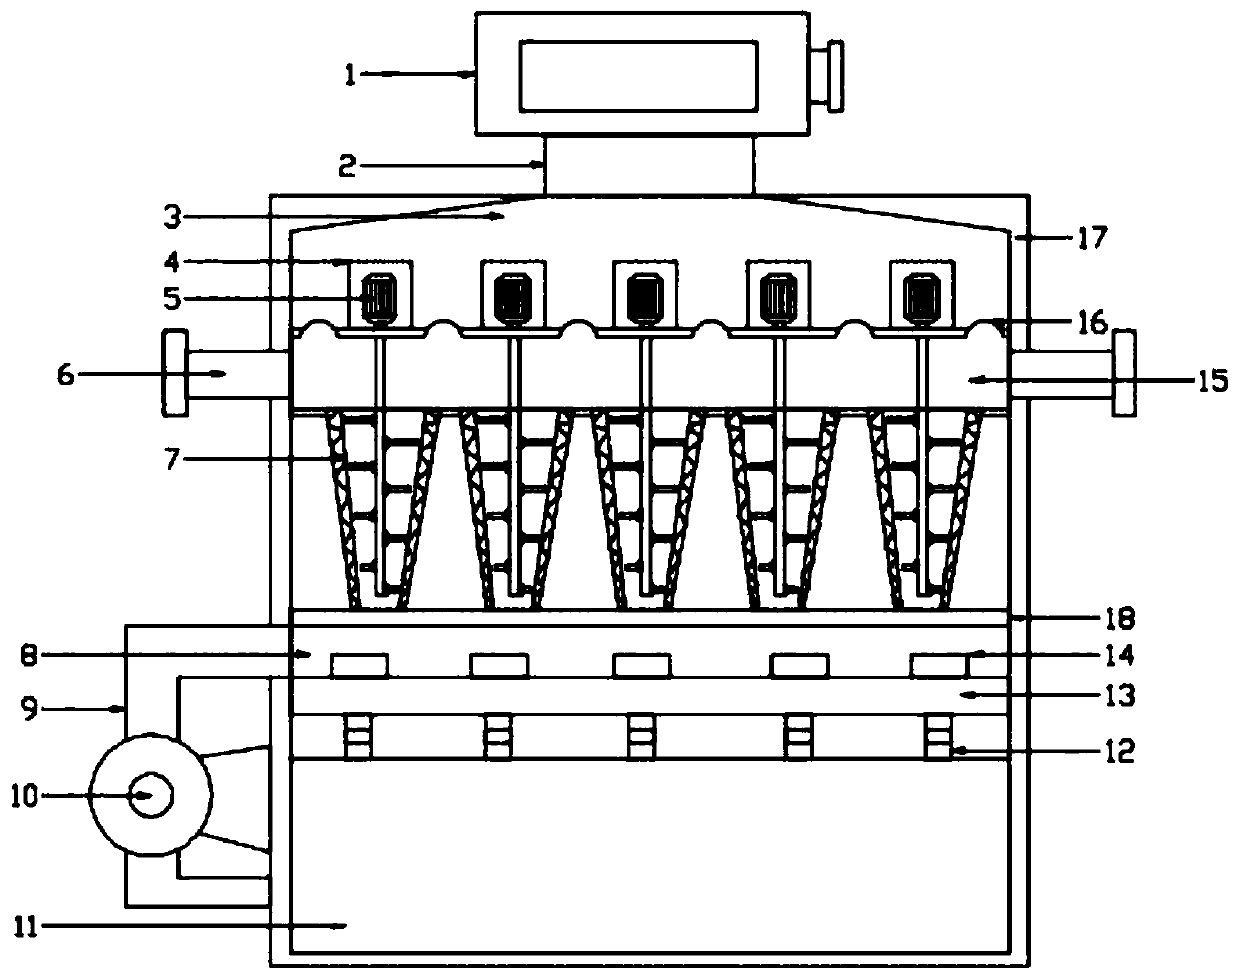 Distillation device used for chemical production